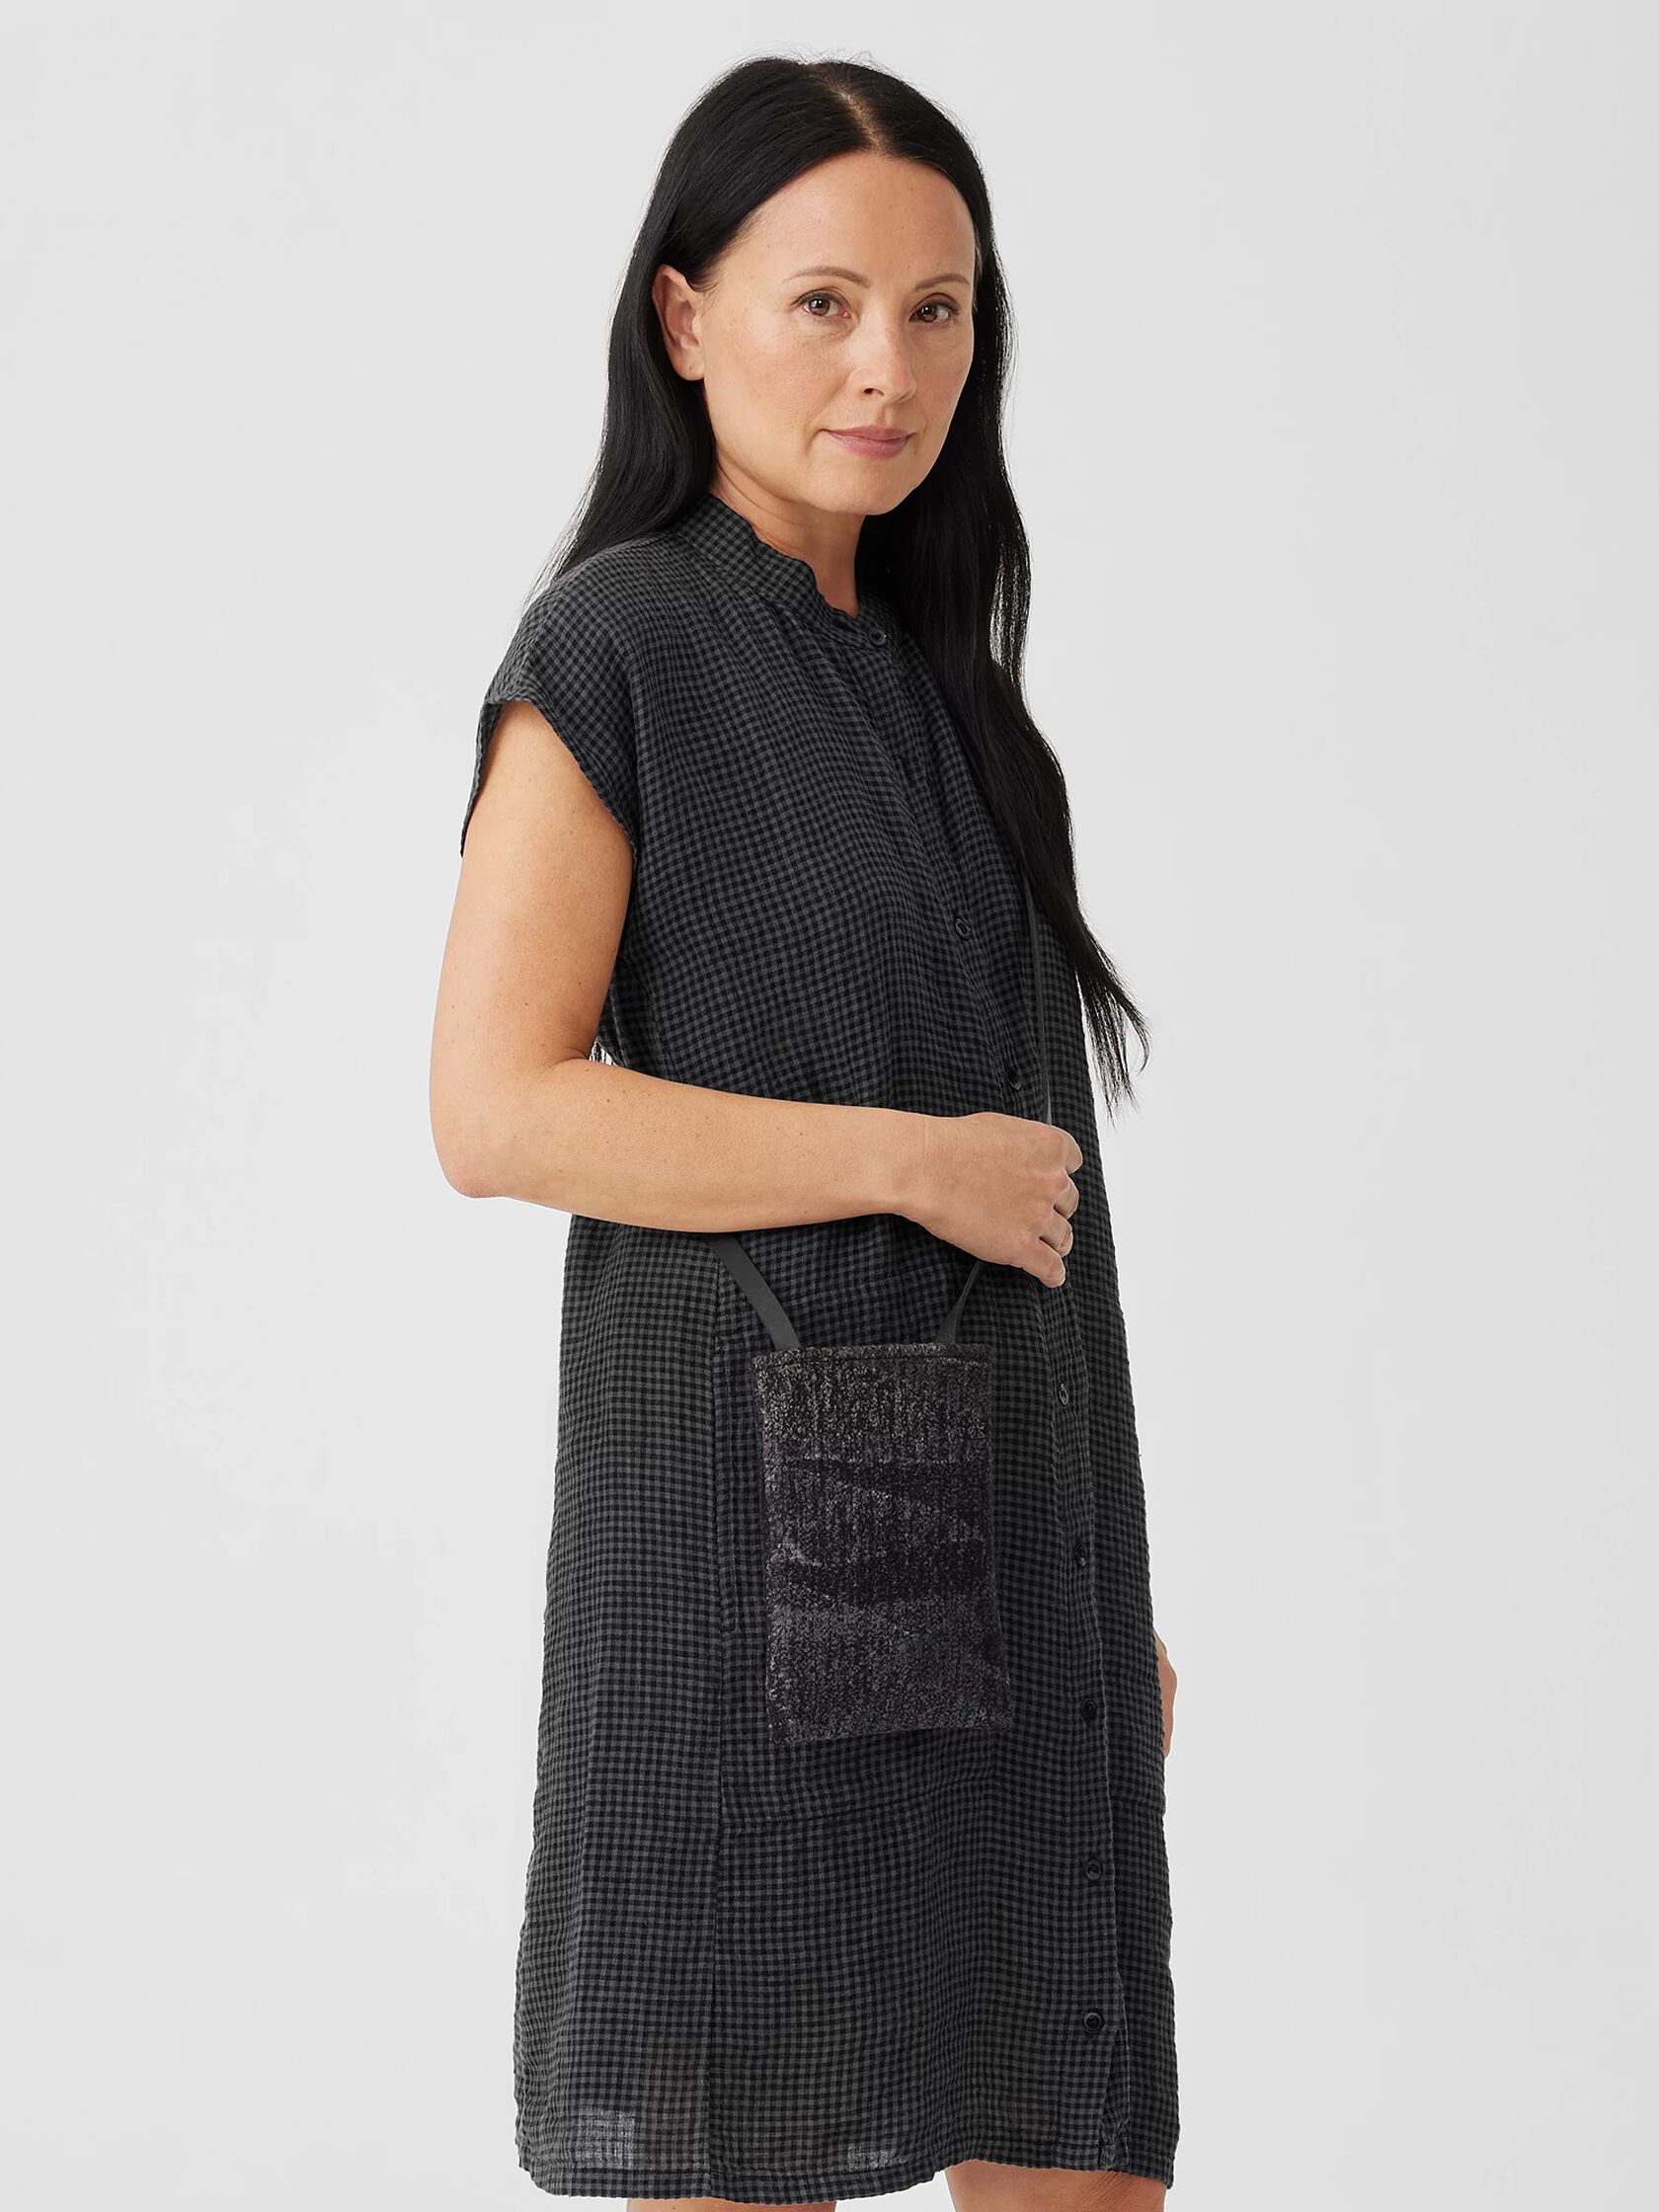 Waste No More Felted Phone Pouch | EILEEN FISHER